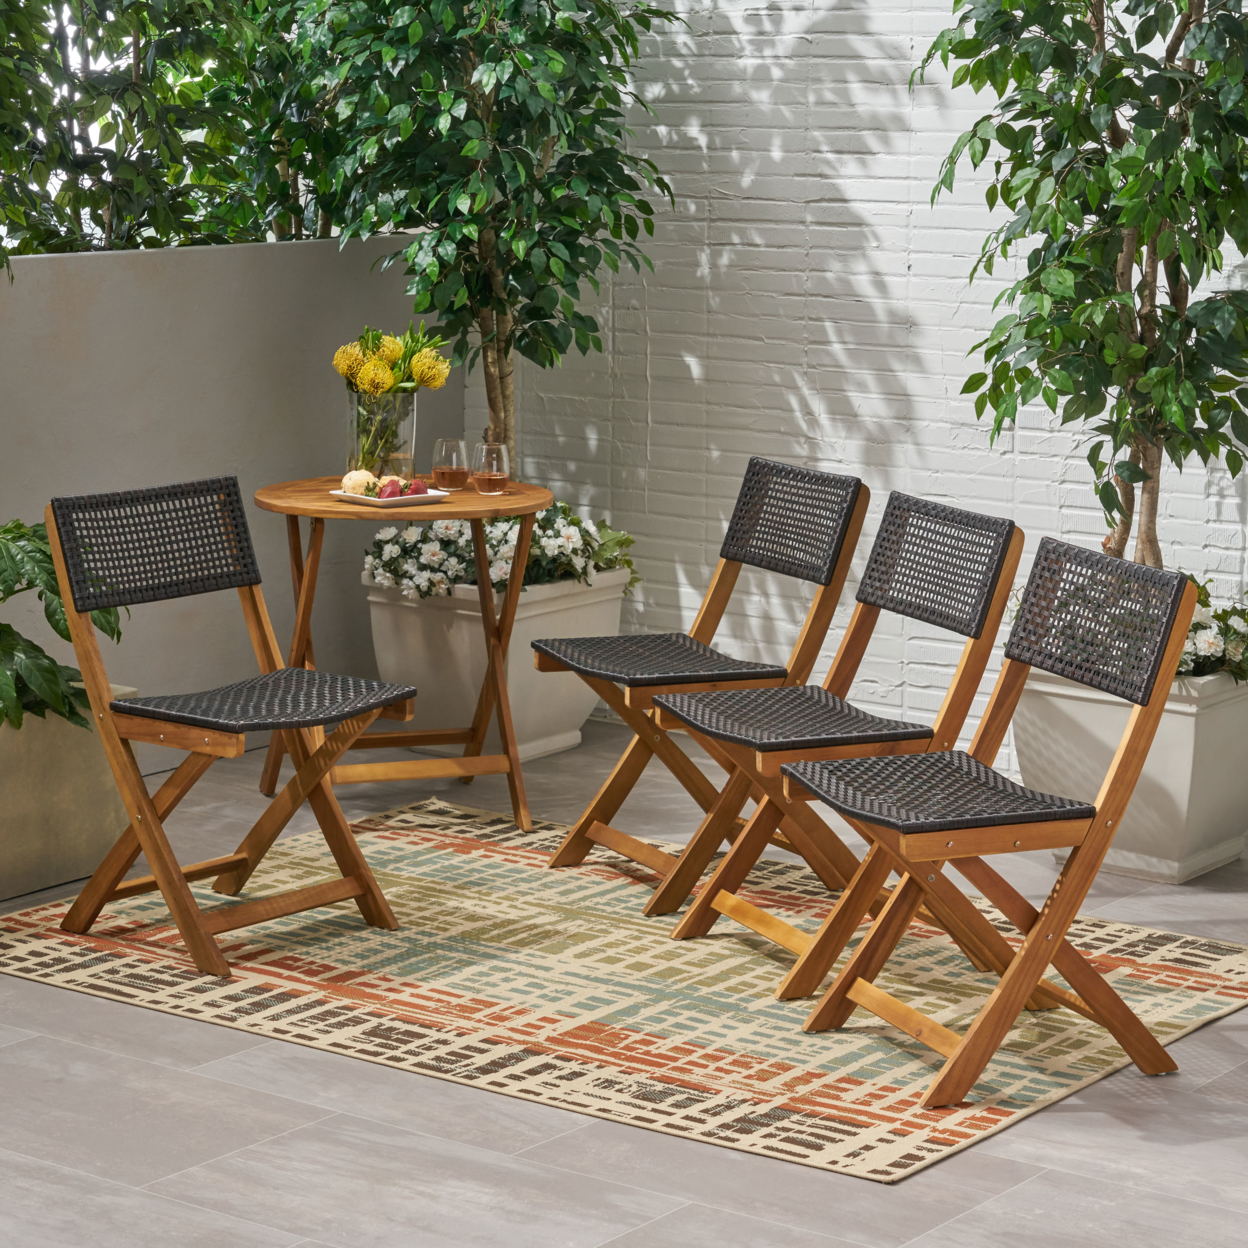 Ida Outdoor Acacia Wood Foldable Bistro Chairs With Wicker Seating (Set Of 4) - Teak Finish + Brown Wicker